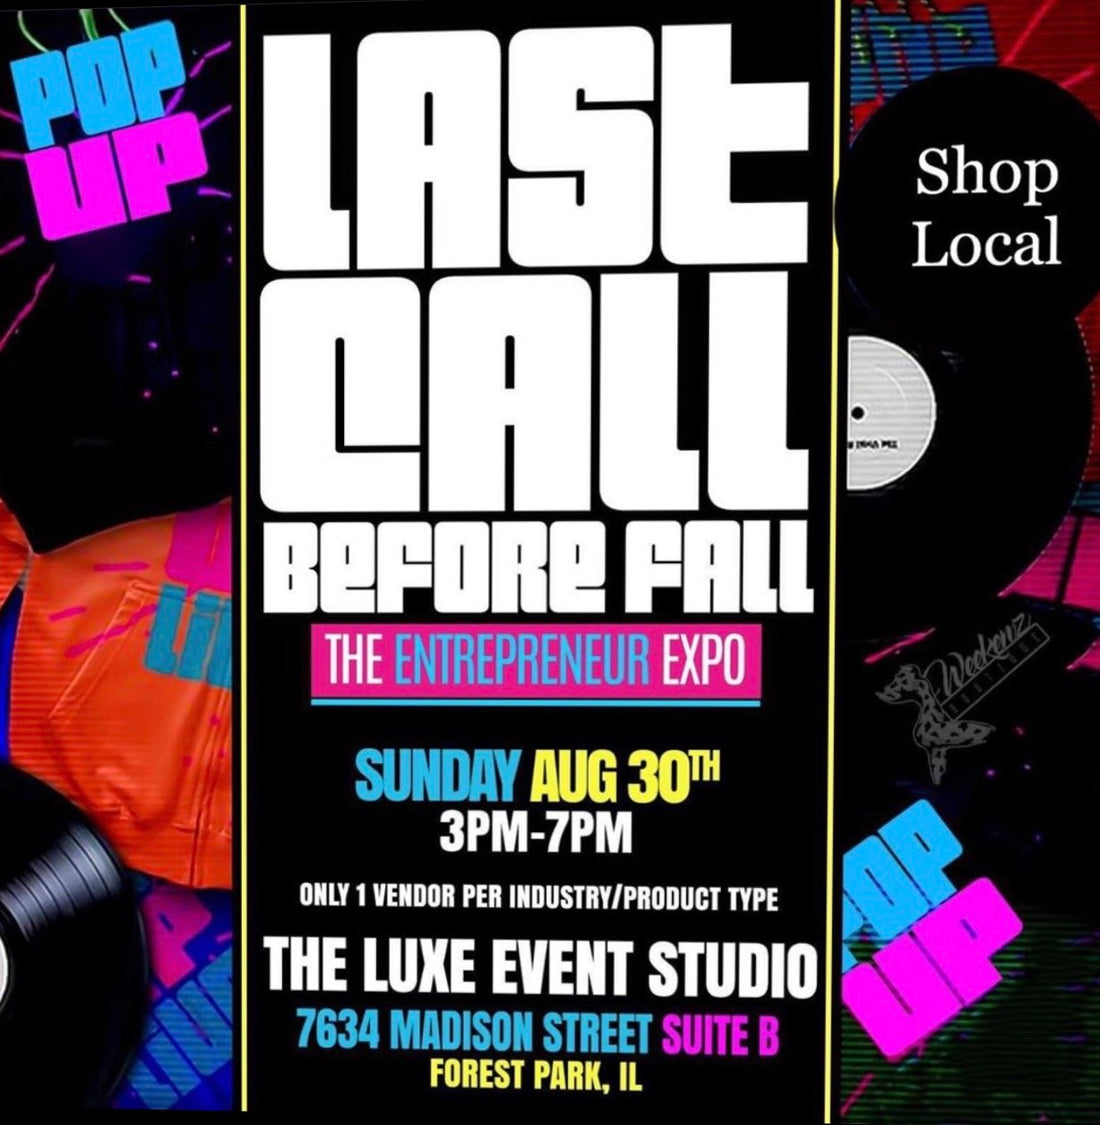 "Last Call Before Fall" THE ENTREPRENUER EXPO